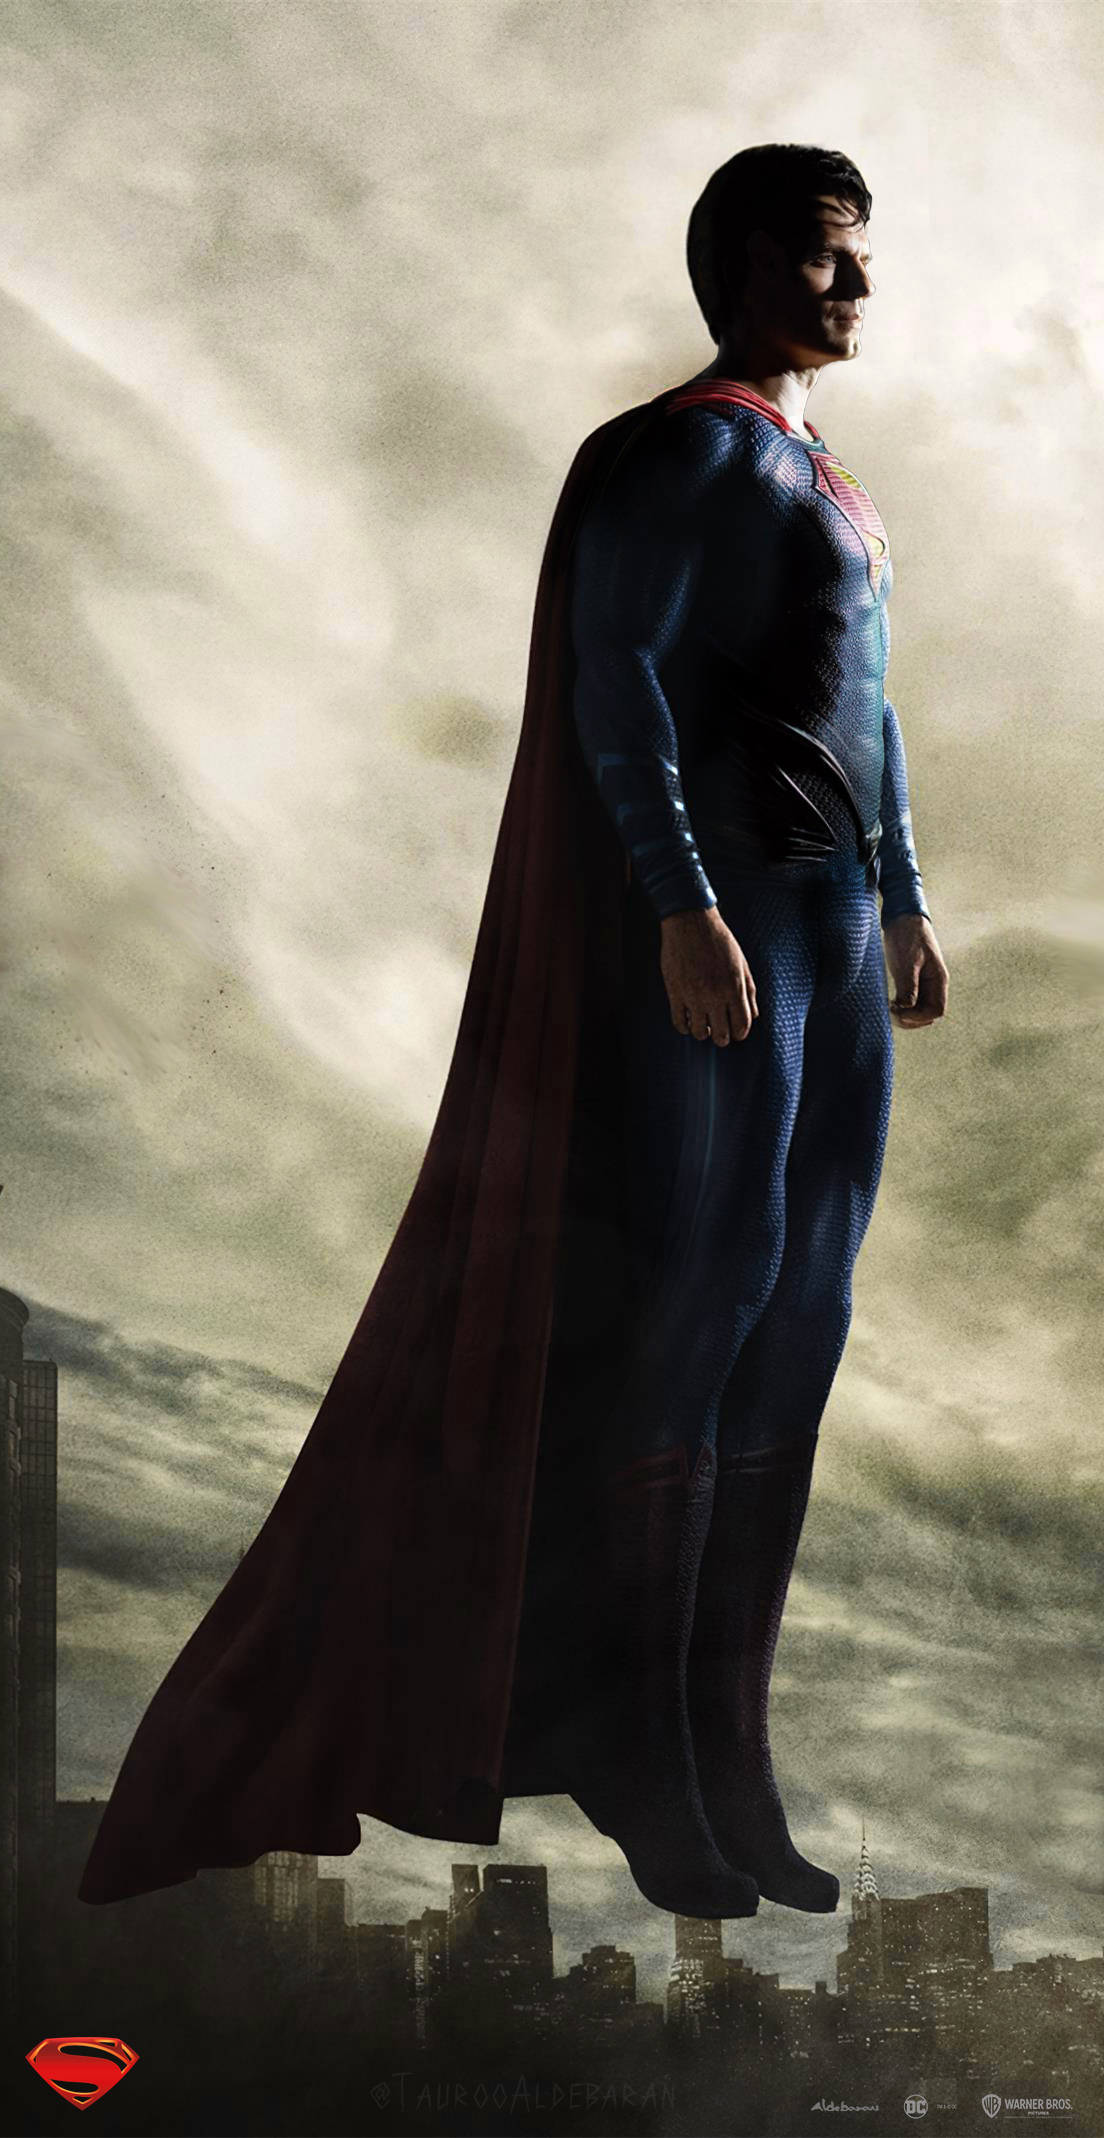 Henry Cavill to return as Superman in 'Man of Steel 2